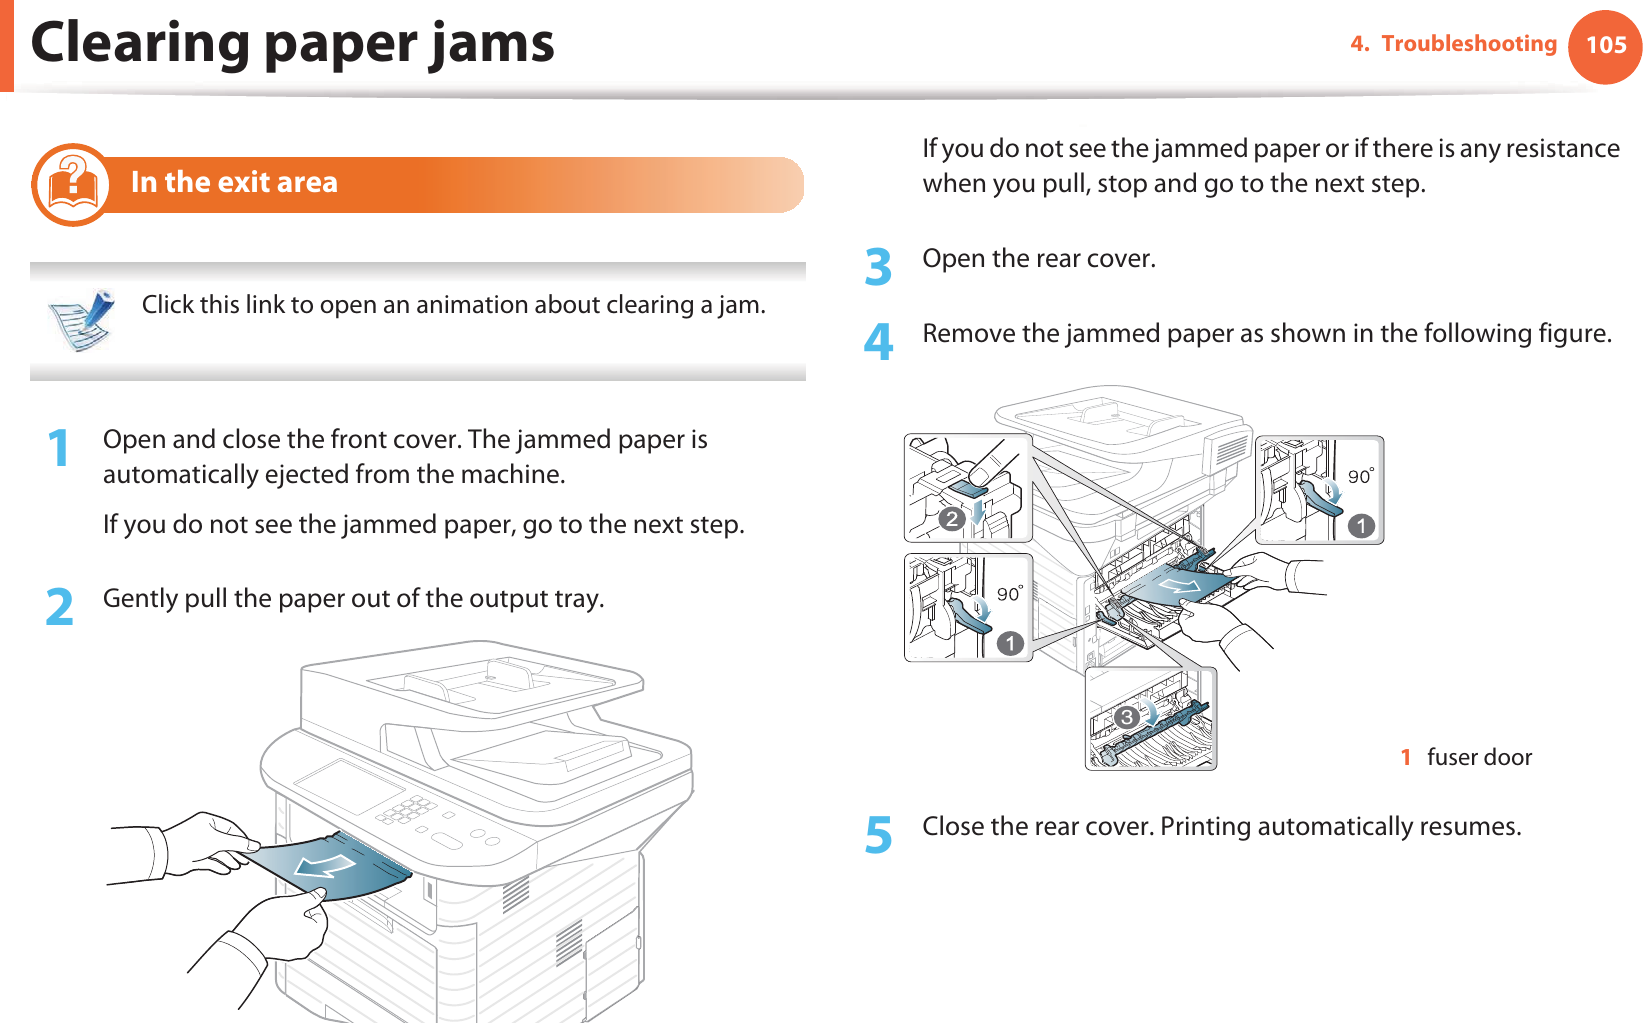 Clearing paper jams 1054. Troubleshooting9 In the exit area Click this link to open an animation about clearing a jam. 1Open and close the front cover. The jammed paper is automatically ejected from the machine.If you do not see the jammed paper, go to the next step.2  Gently pull the paper out of the output tray.If you do not see the jammed paper or if there is any resistance when you pull, stop and go to the next step.3  Open the rear cover.4  Remove the jammed paper as shown in the following figure.5  Close the rear cover. Printing automatically resumes.1fuser door33